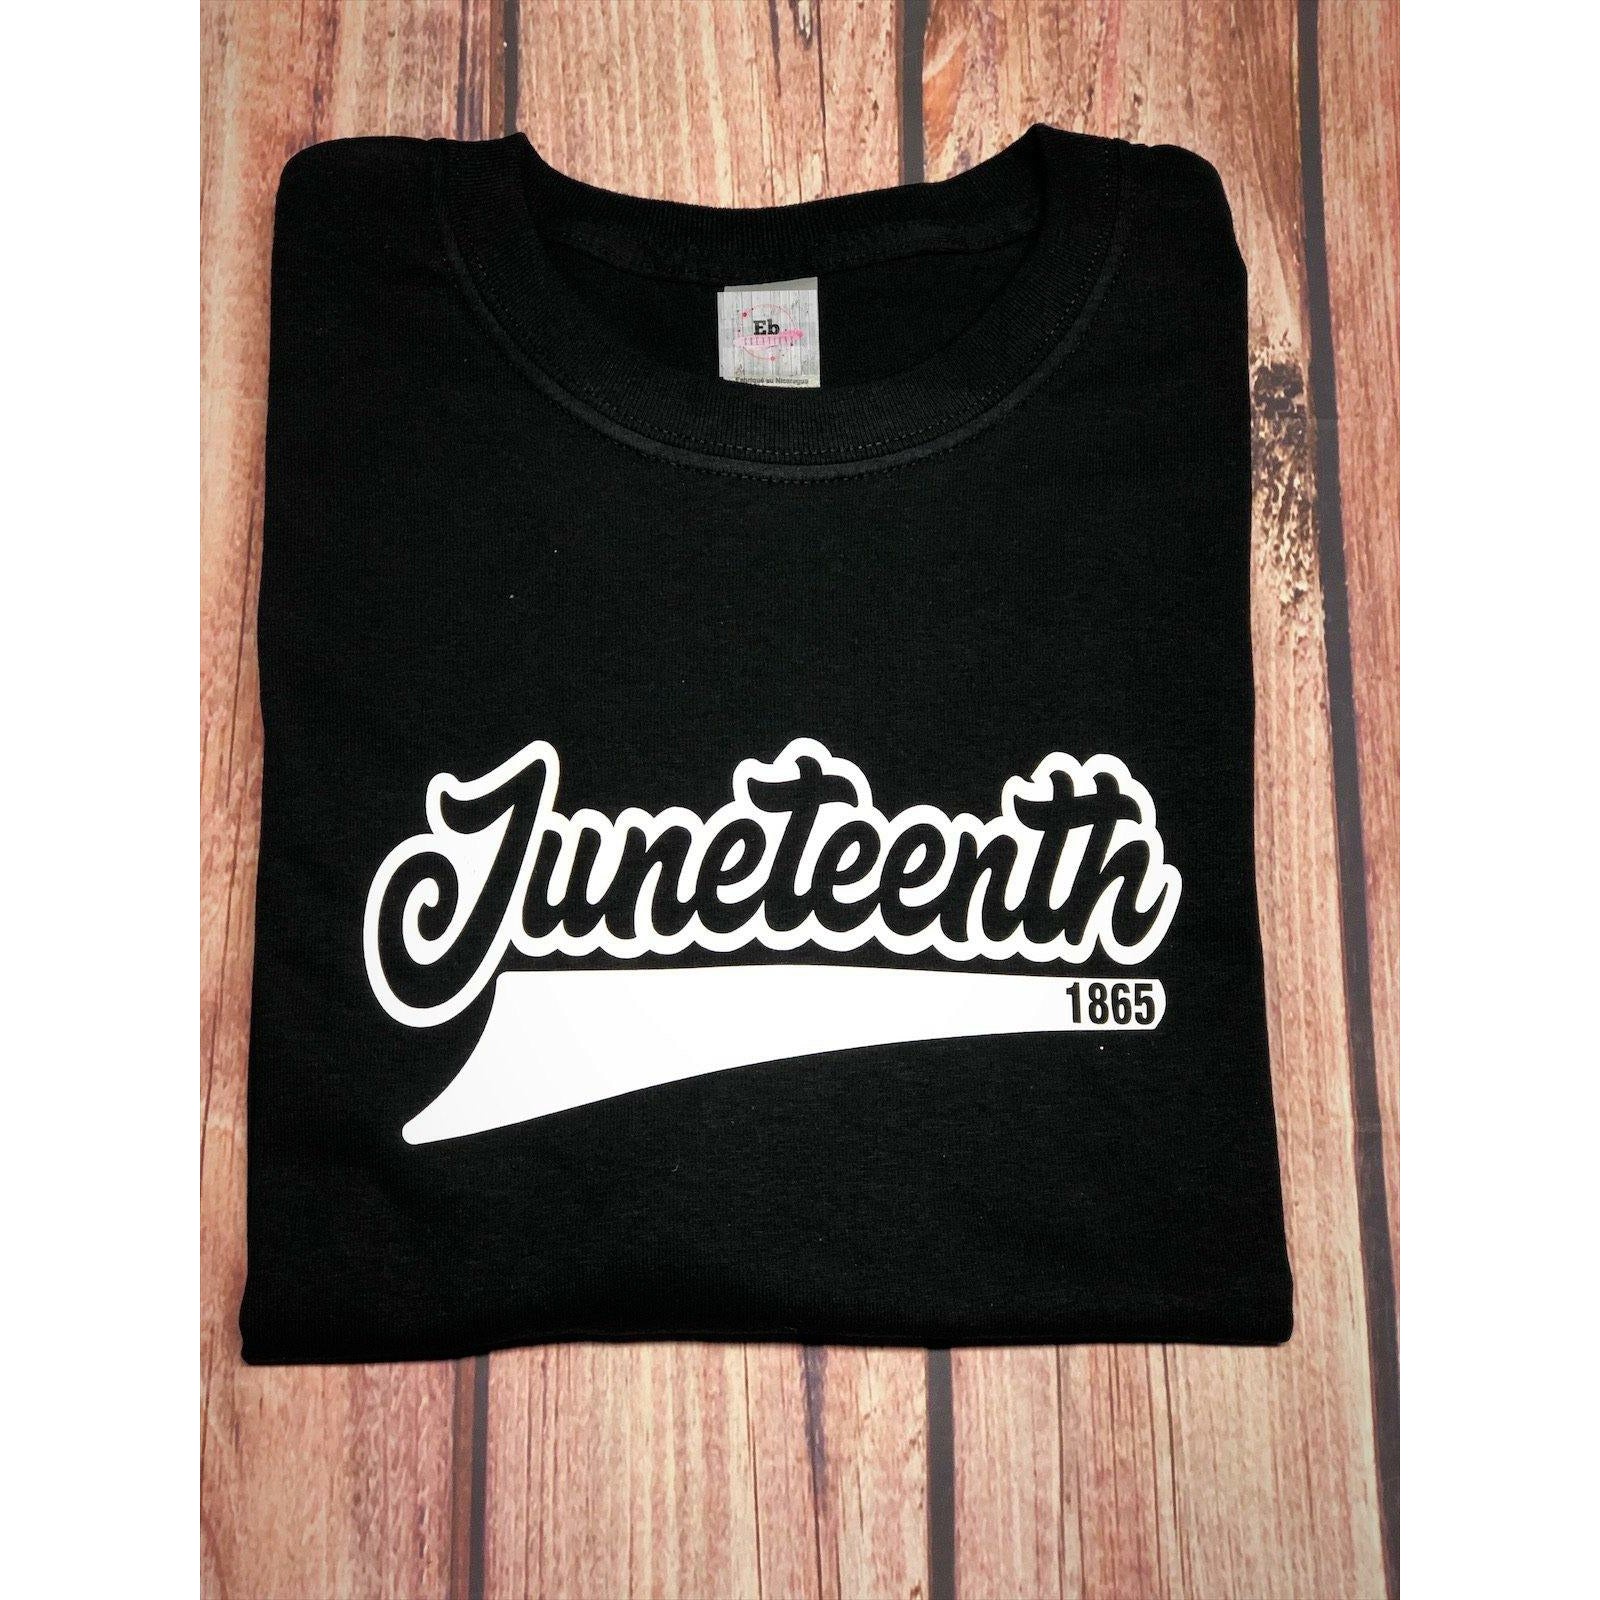 Juneteenth Shirt| Independence day| Black History - Eb Creations Juneteenth Shirt| Independence day| Black History